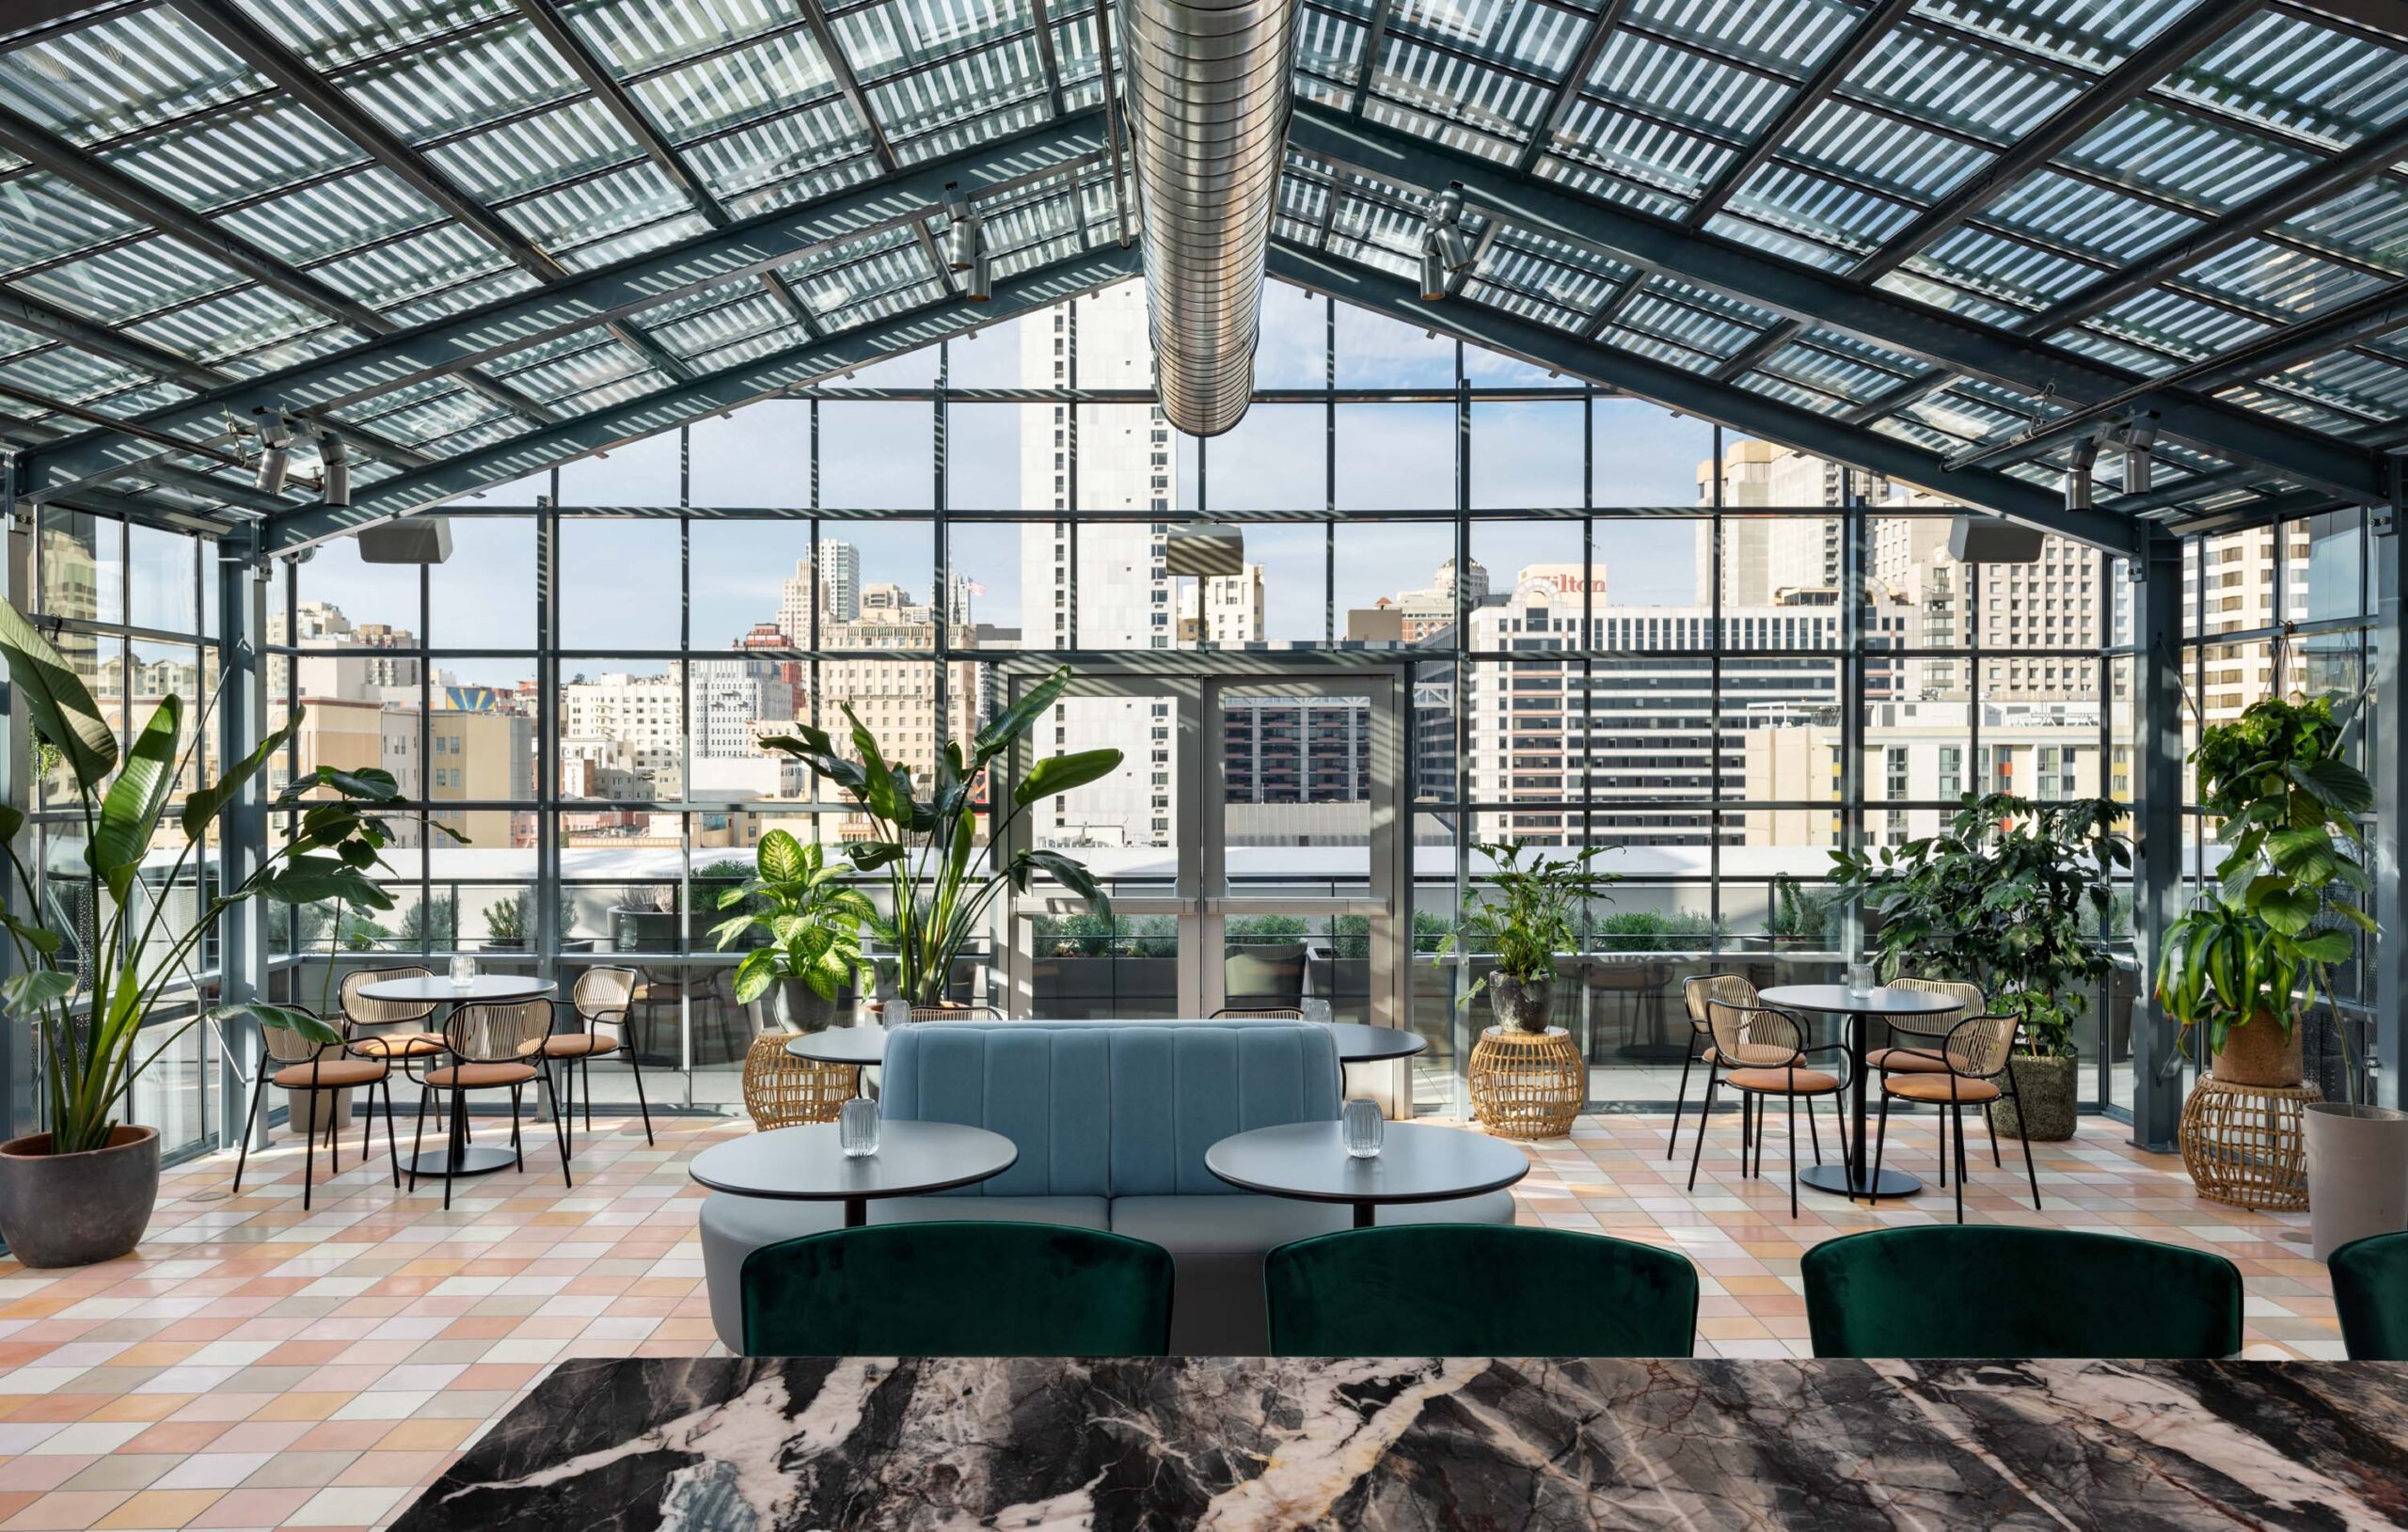 A rooftop solarium bar with furnishings and a breathtaking city view.